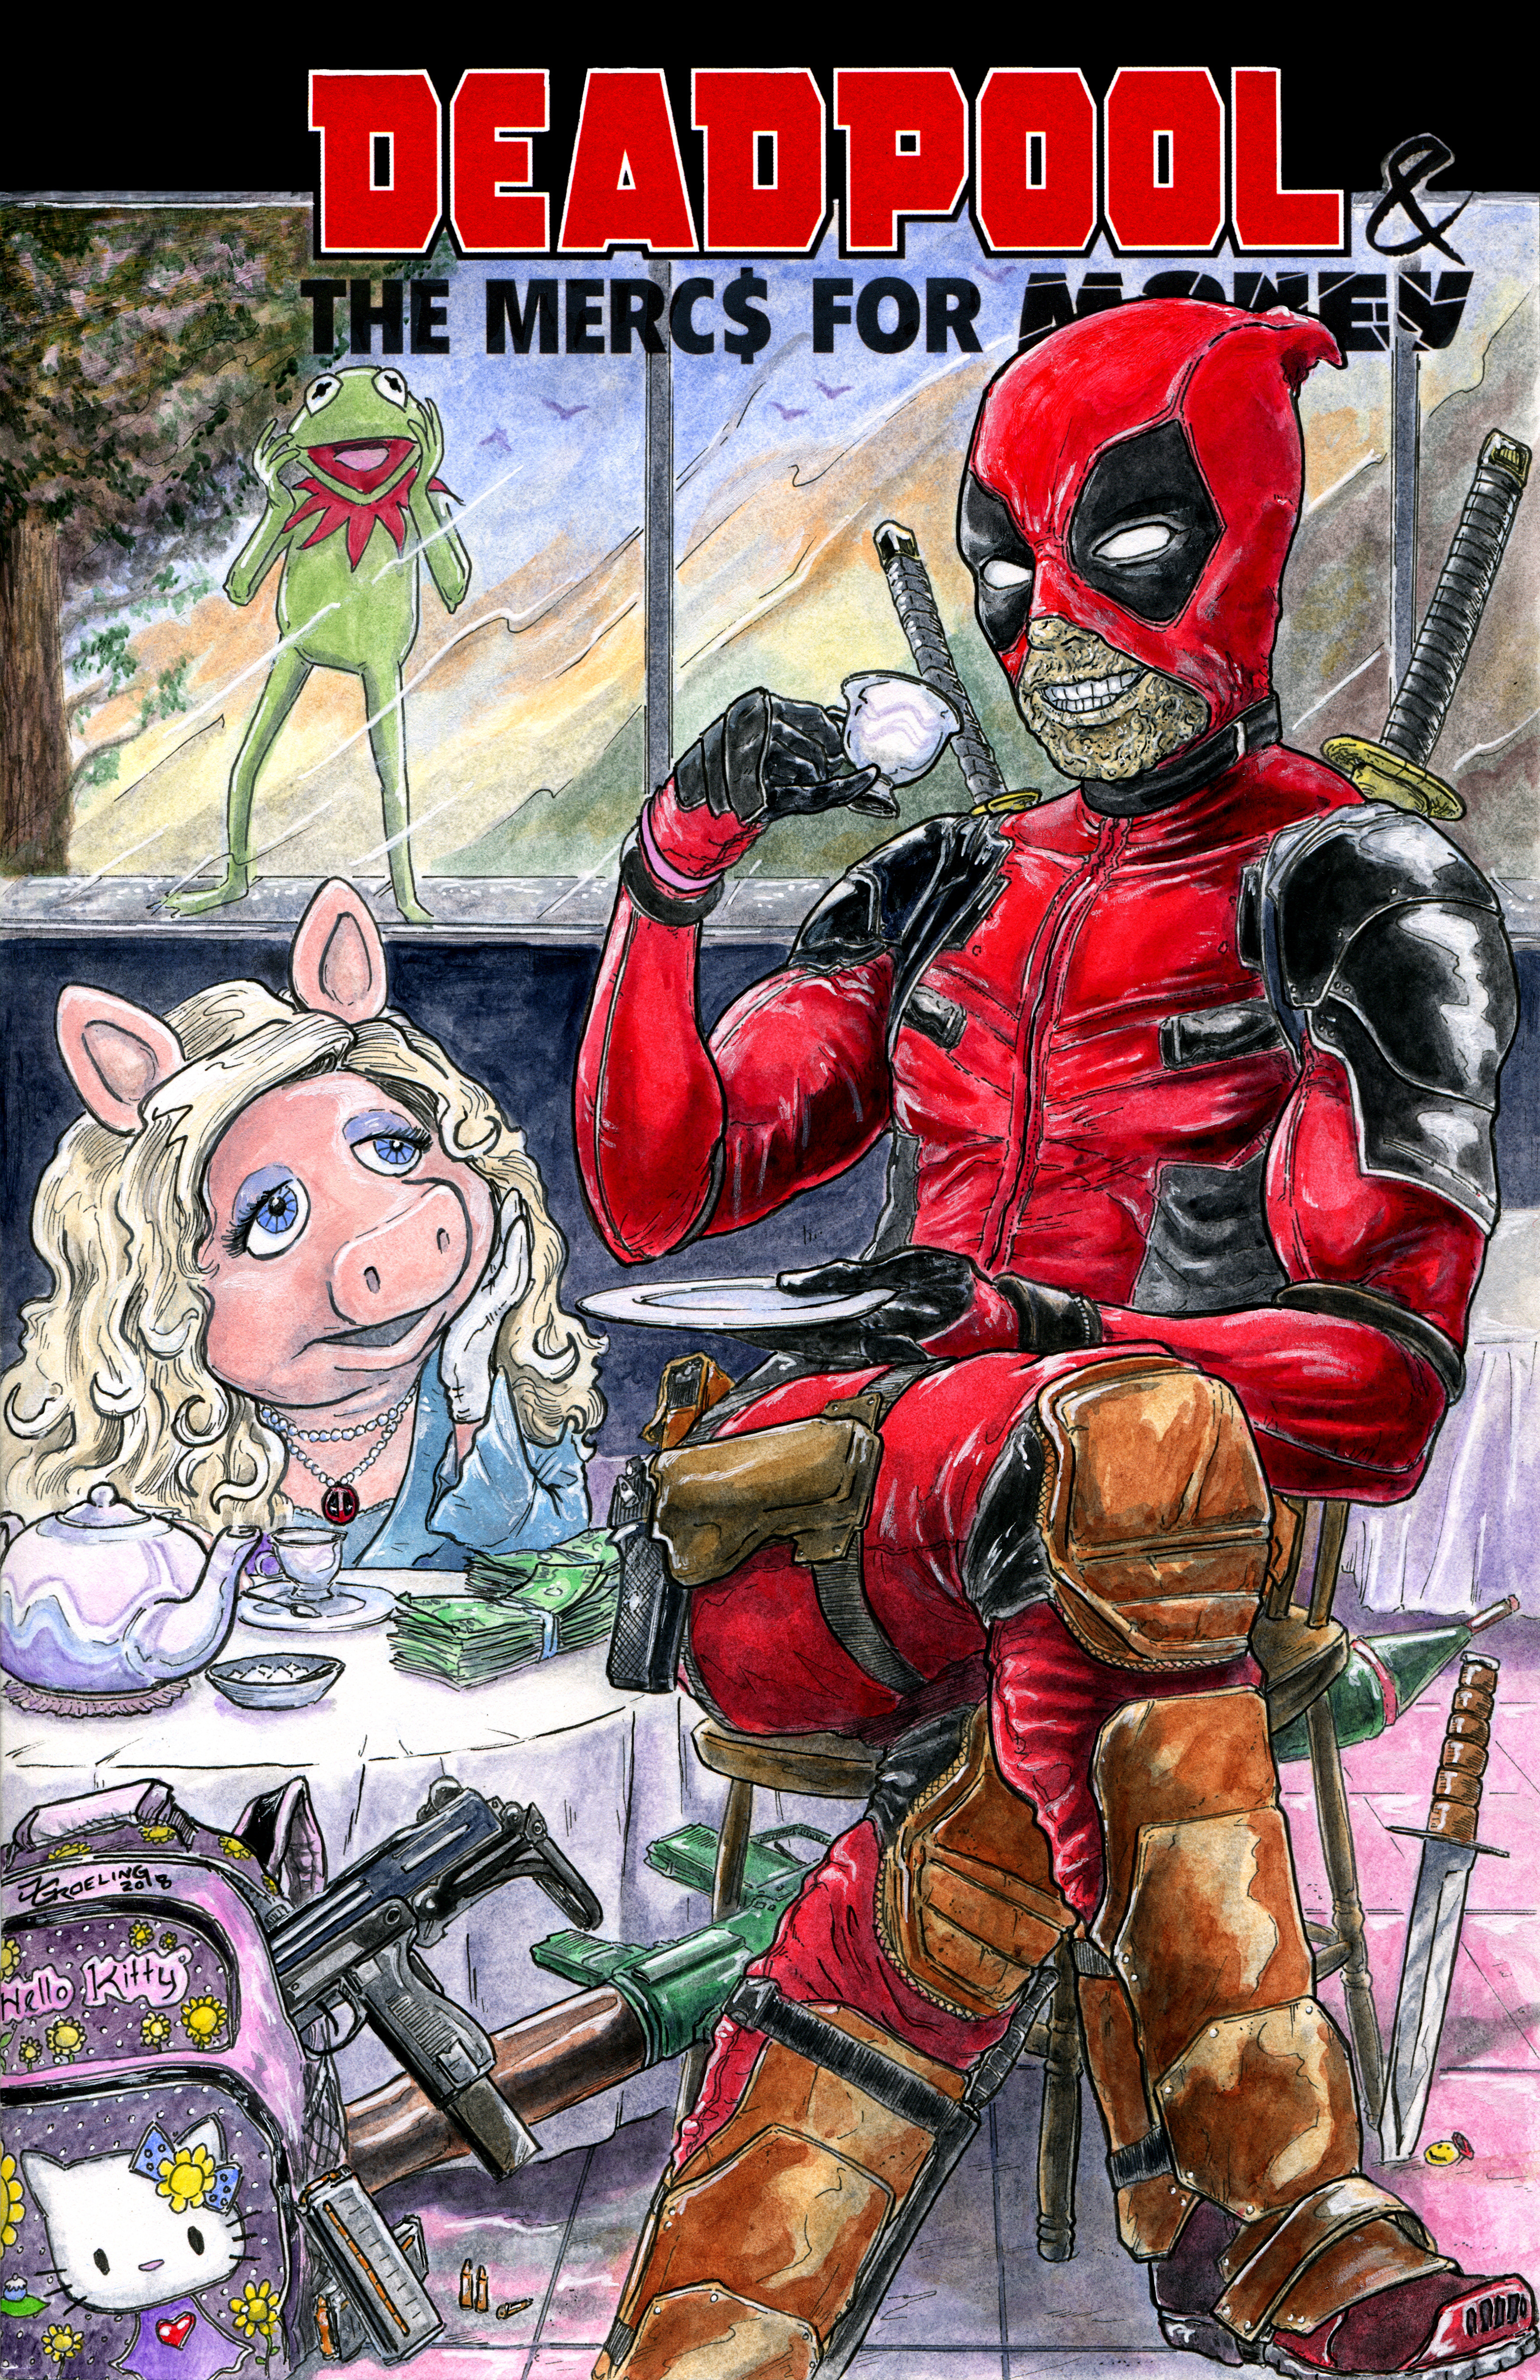 Deadpool 96 cgc original art on variant sketch cover  yellow bg  The  Art of Brian Kong  Online Store Powered by Storenvy